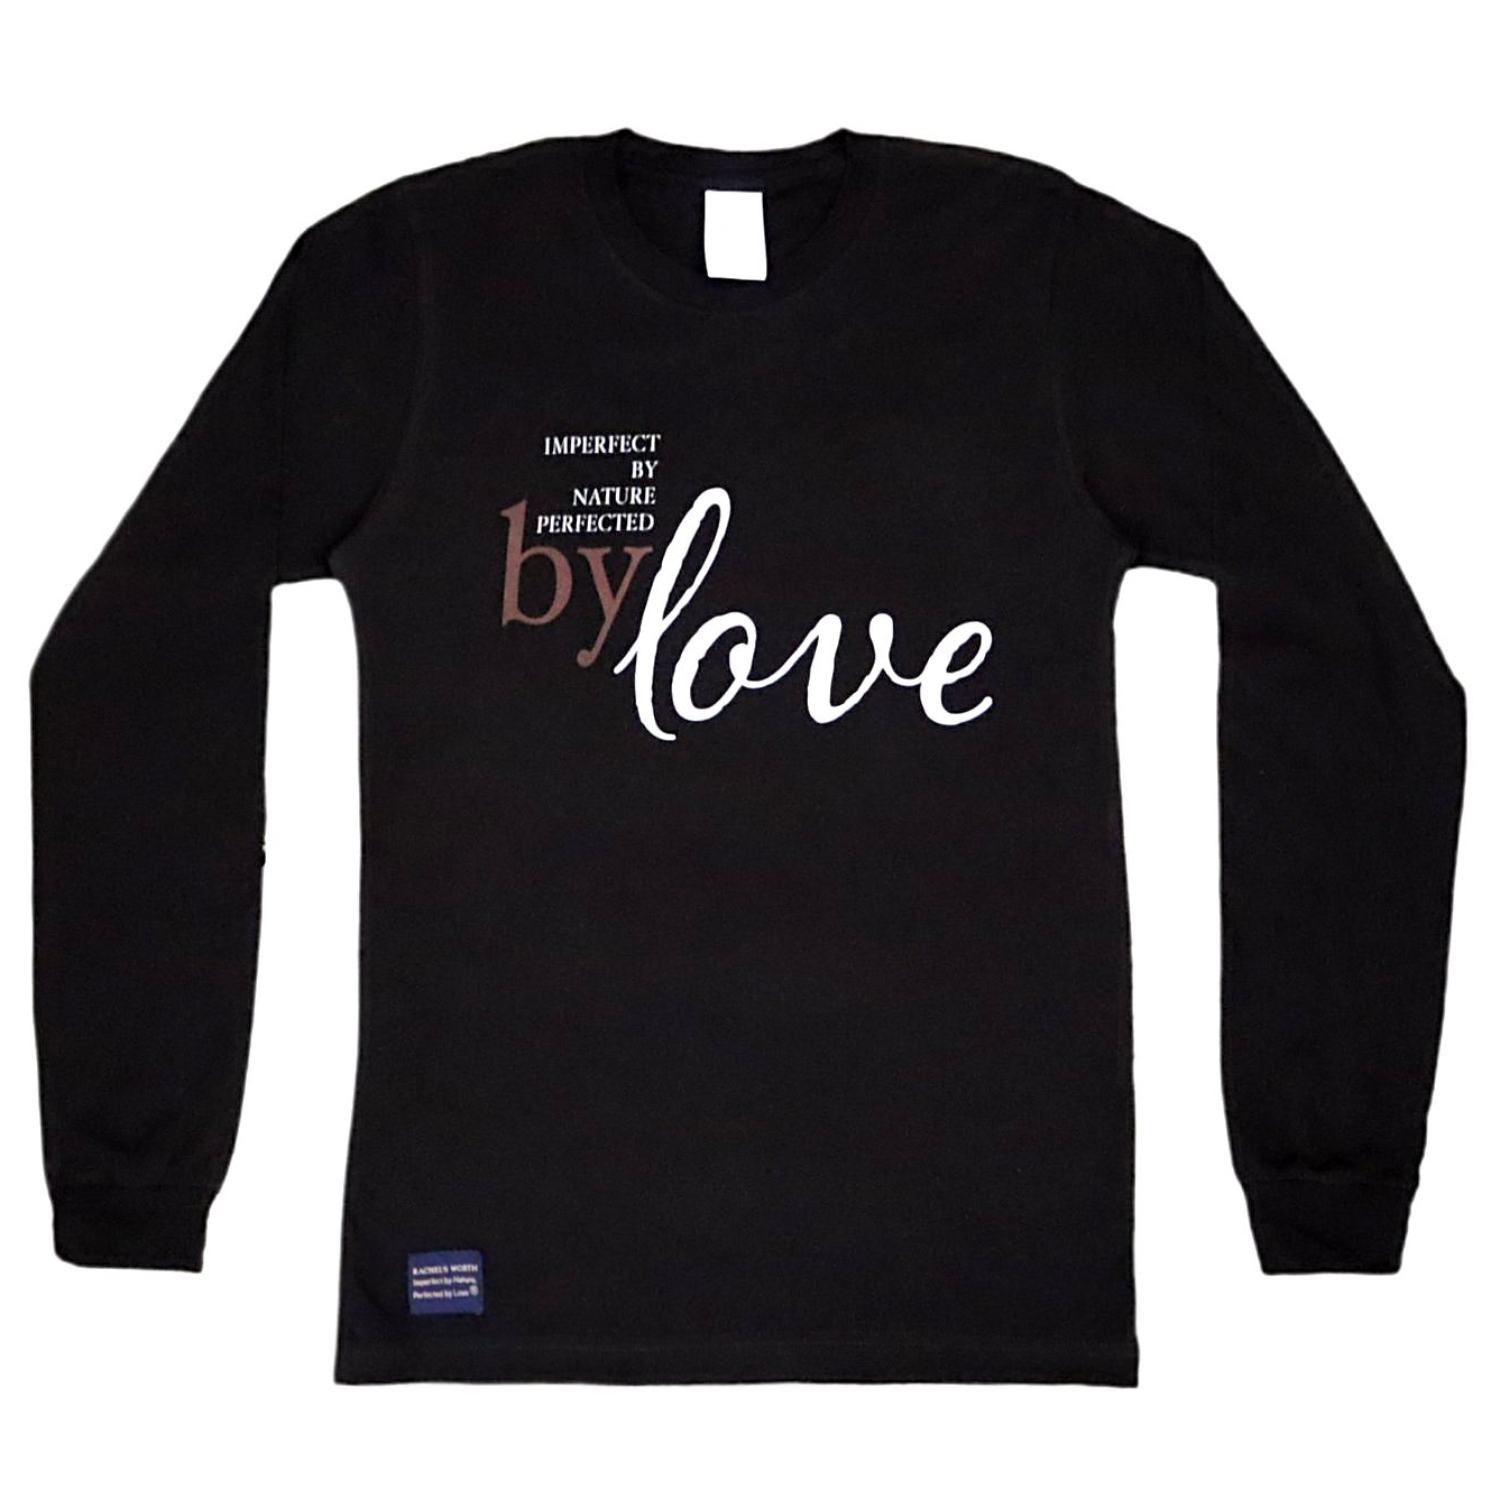 Black Long Sleeve Perfected by Love Shirt